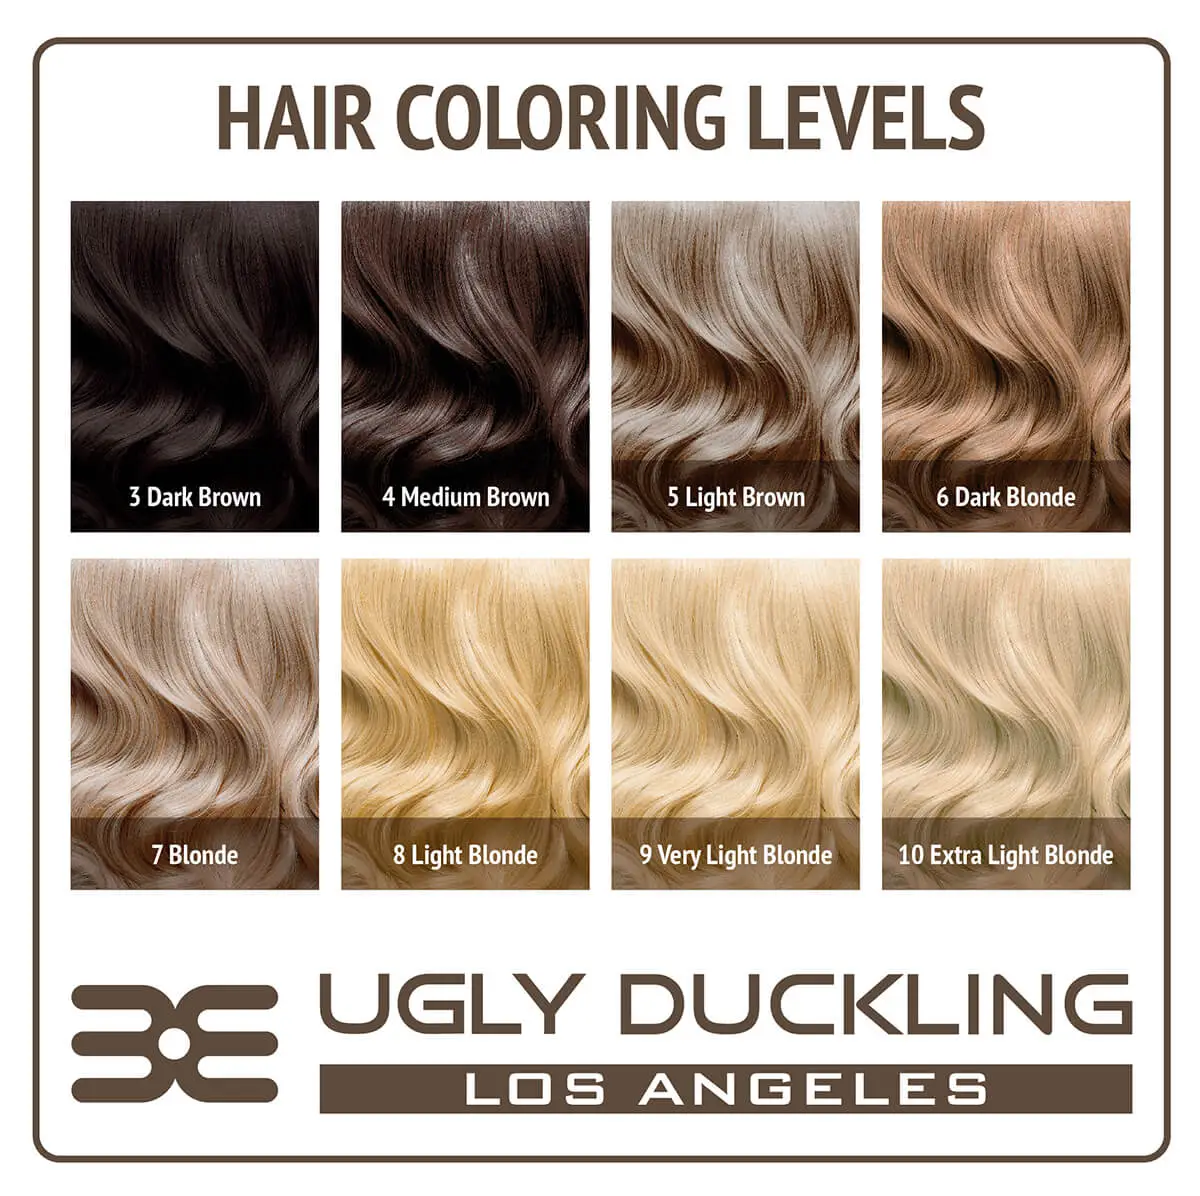 Level 8 blonde with bright blonde ends. Natural level 2 Asian hair